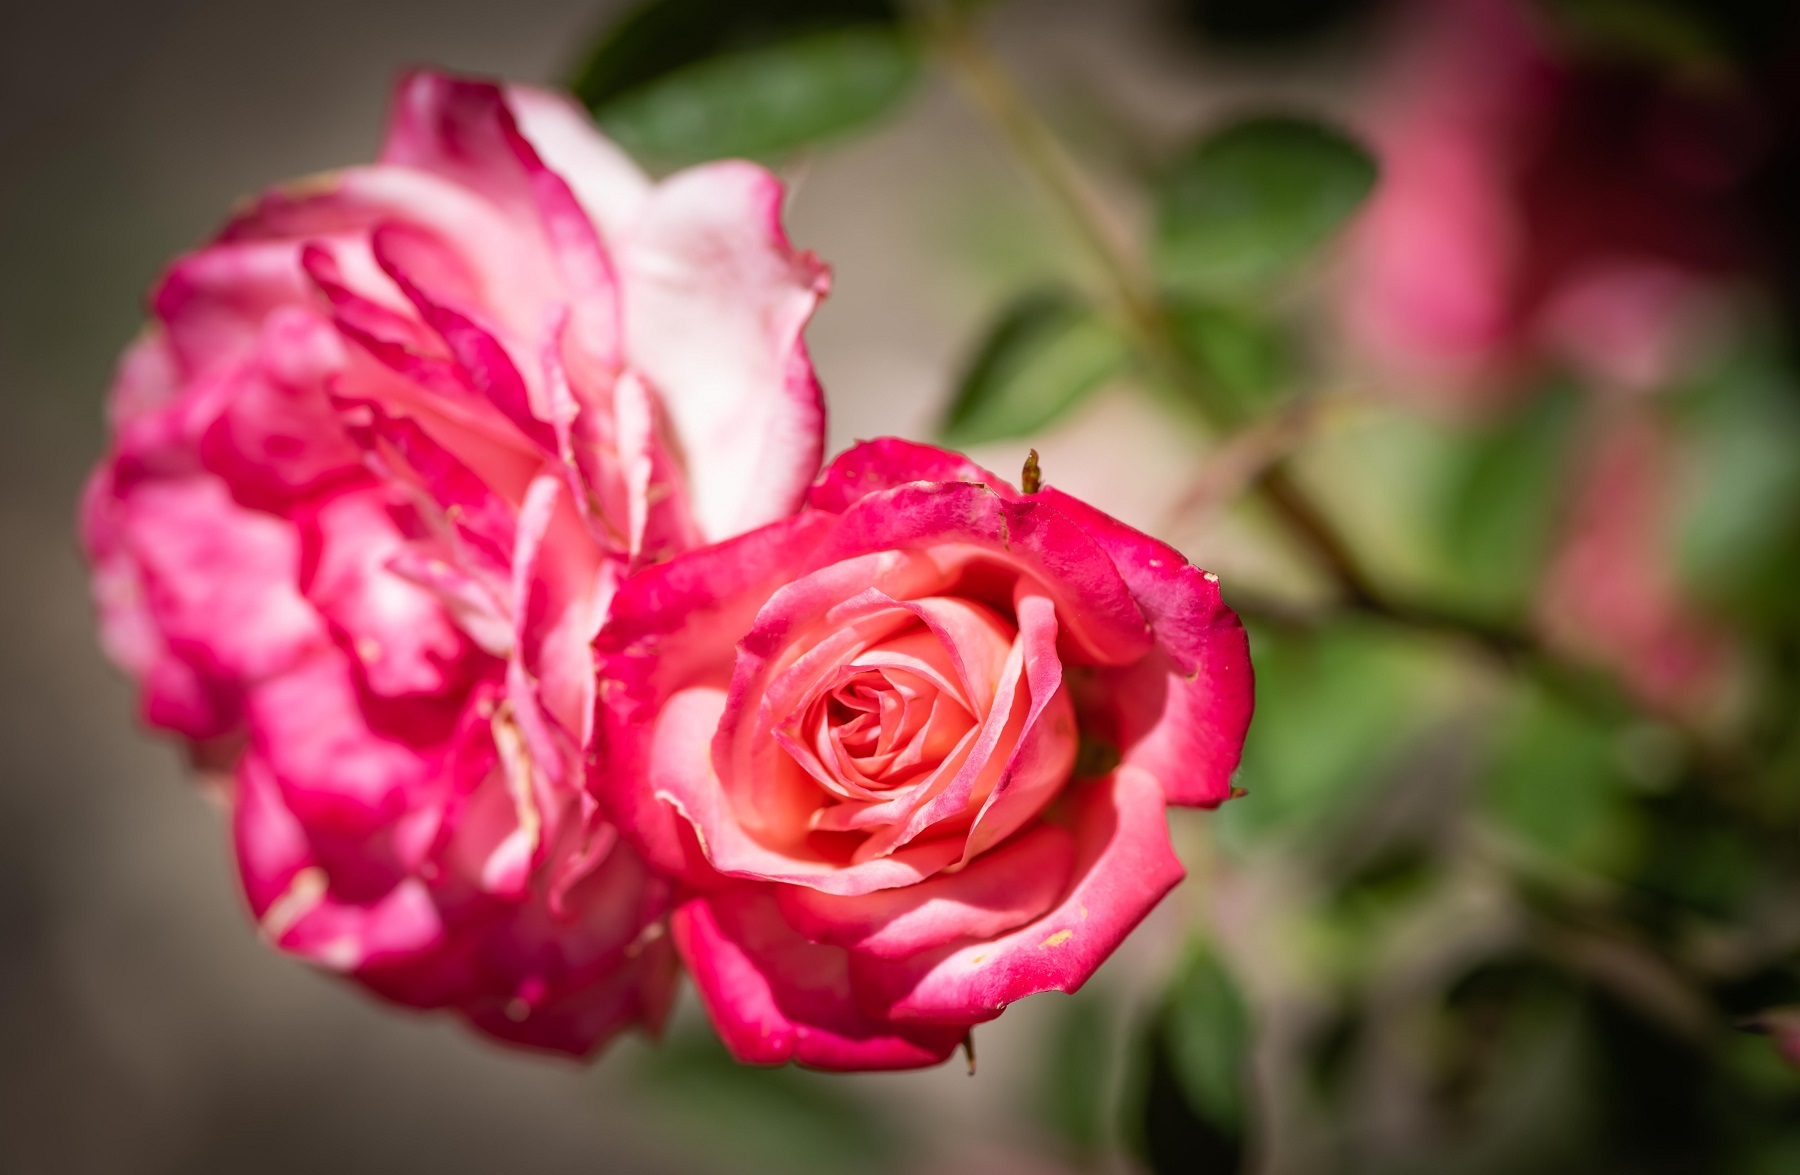 Stop and smell the roses. Abundant rose bushes for your visual pleasure.